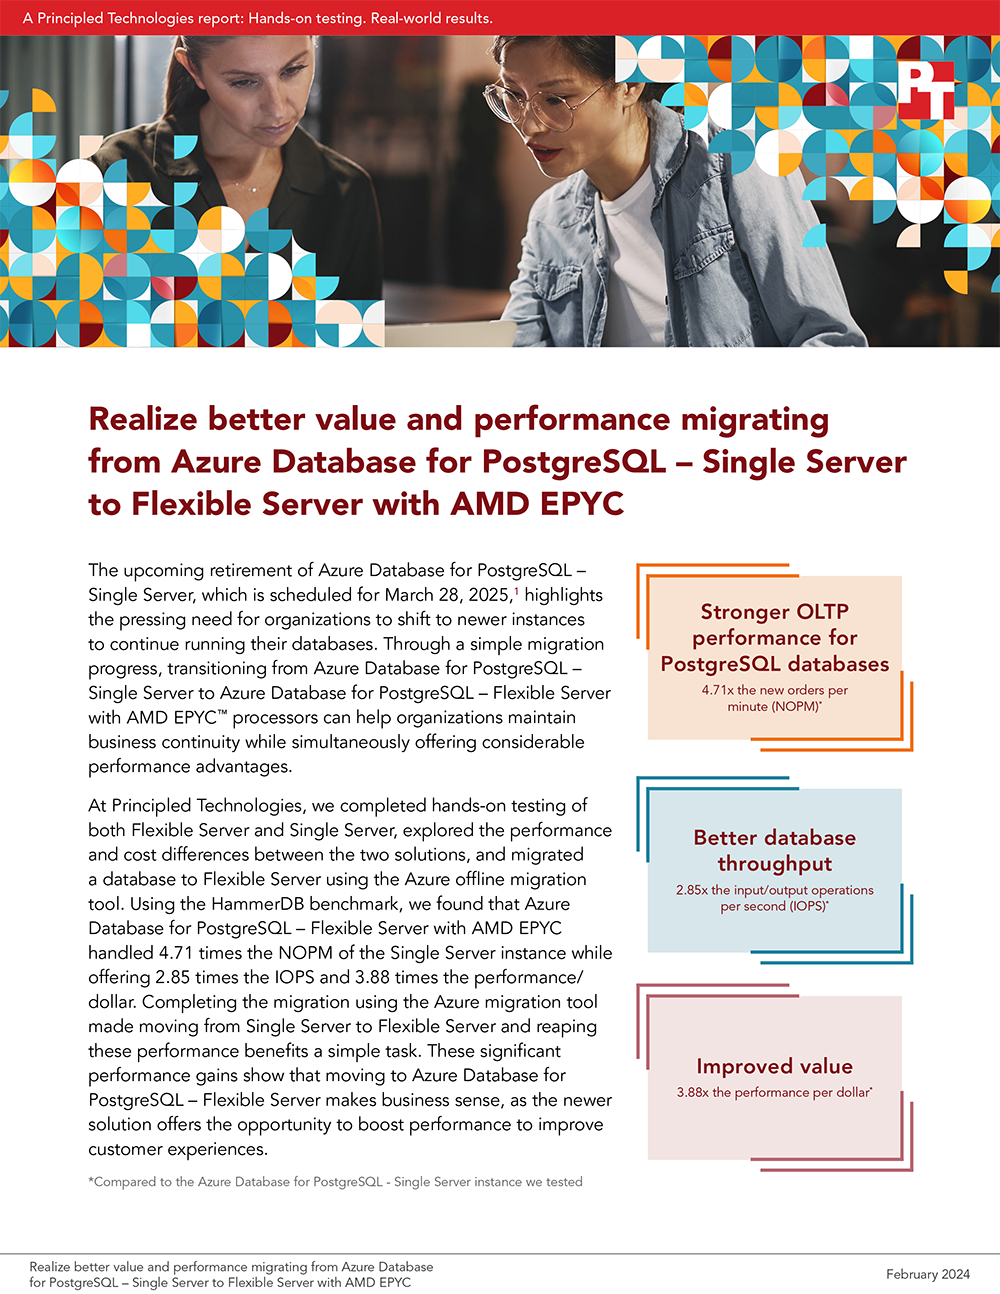 Realize better value and performance migrating from Azure Database for PostgreSQL – Single Server to Flexible Server with AMD EPYC 